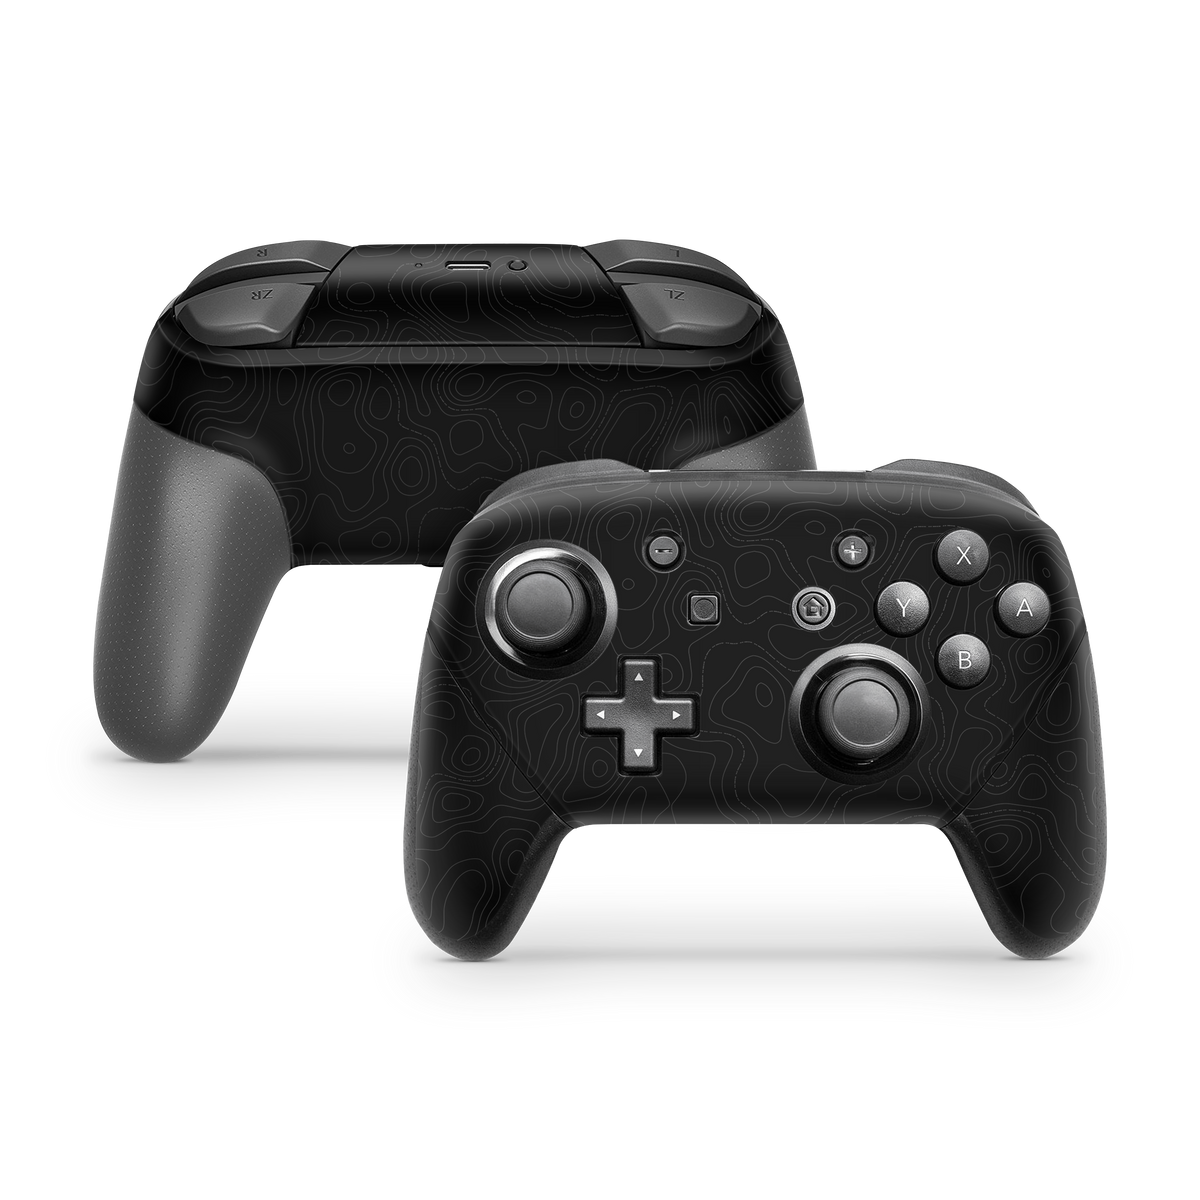 Nintendo Switch Controller Lost